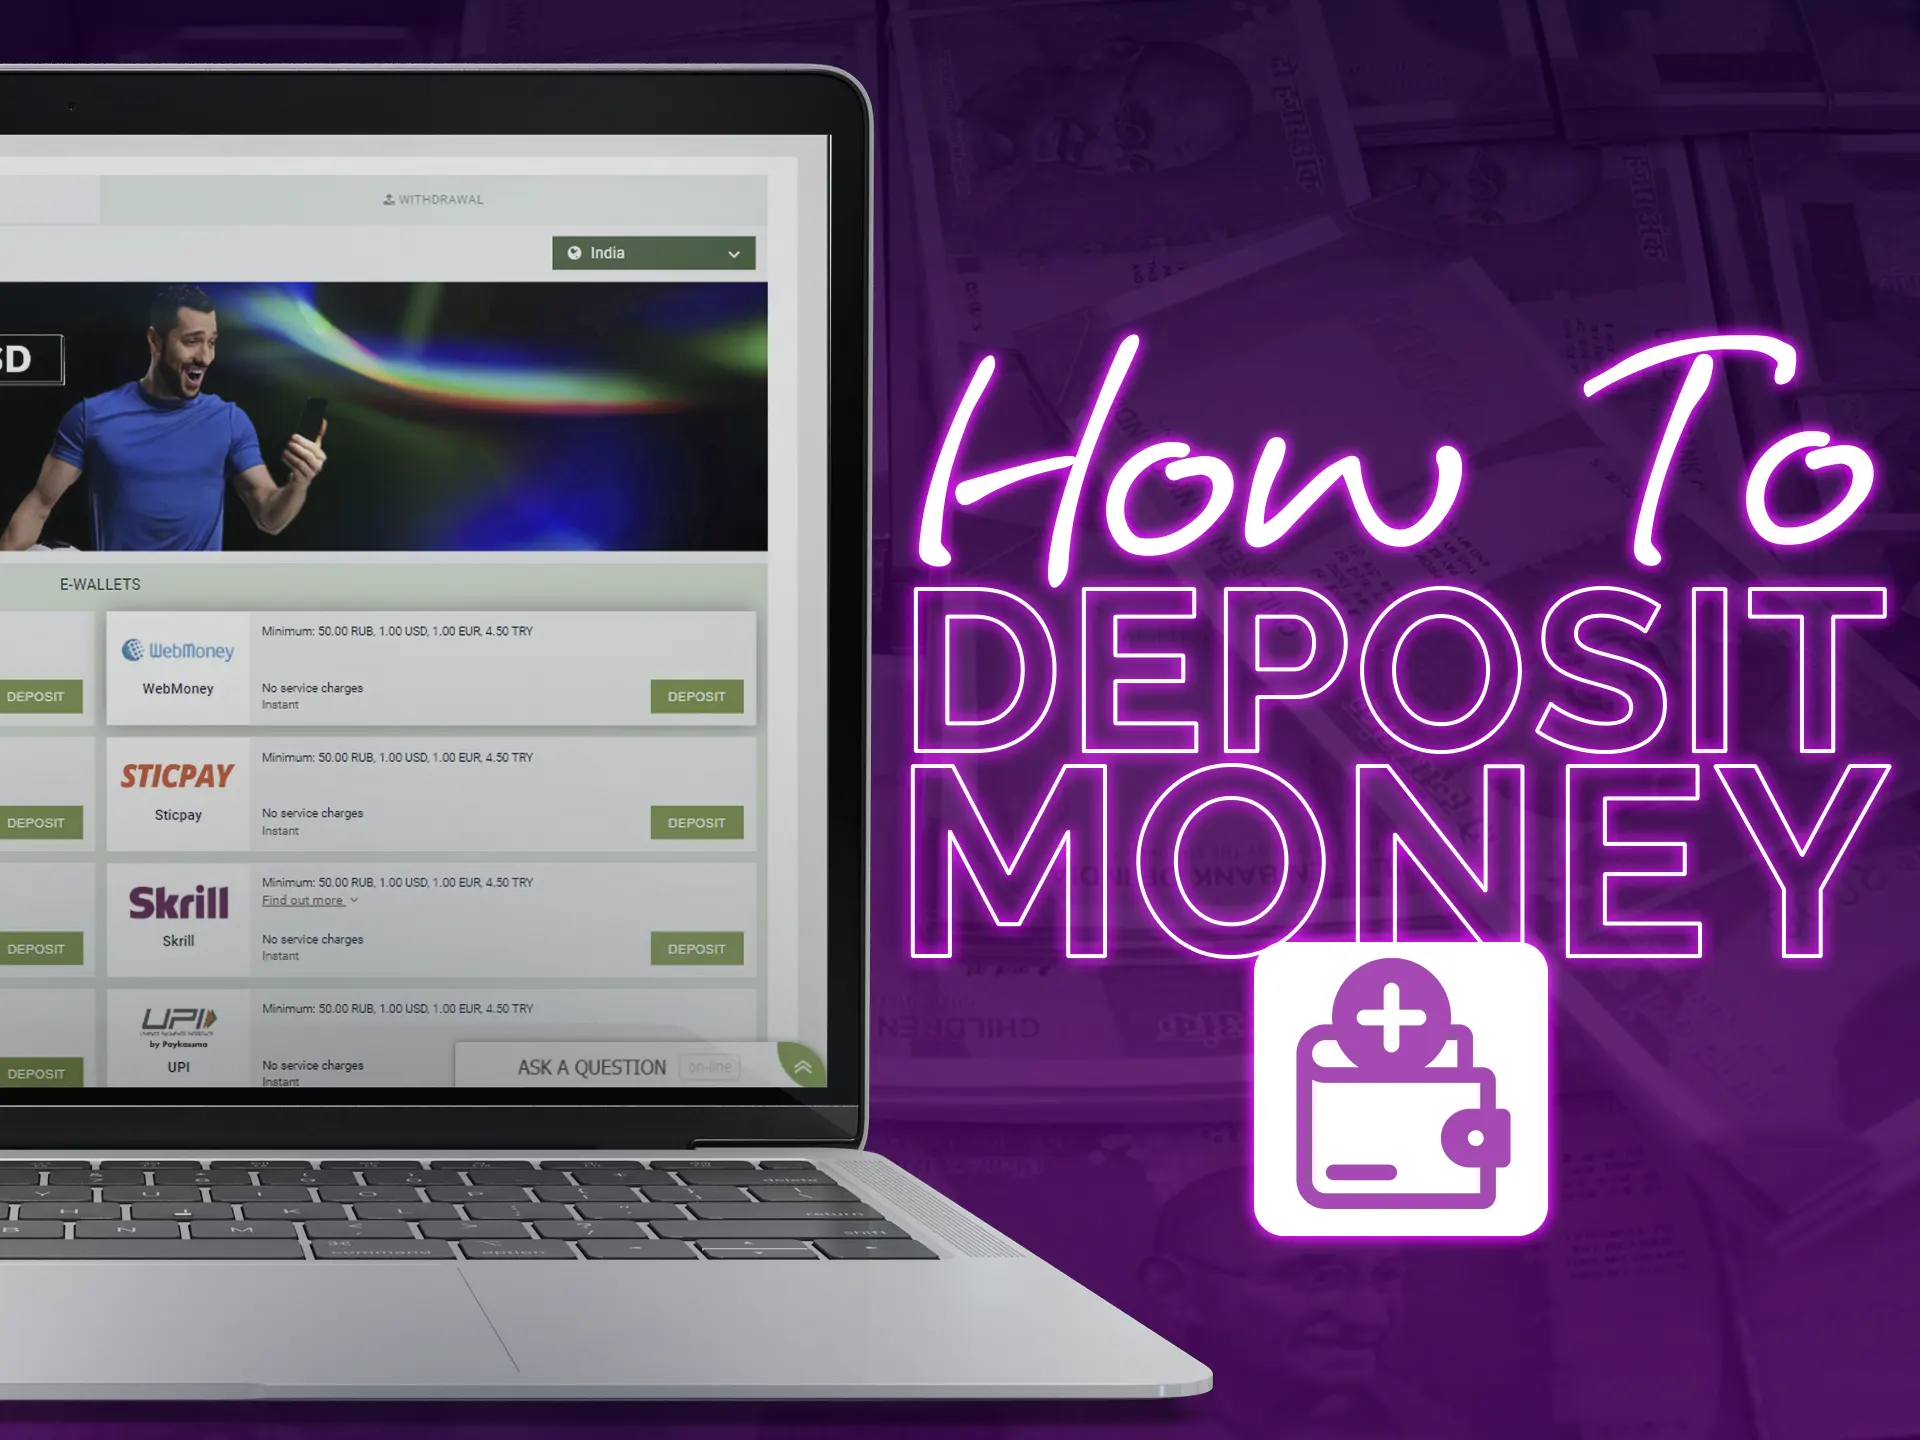 To play with real money, deposit using these steps - log in, access your profile, deposit, confirm, and wait.